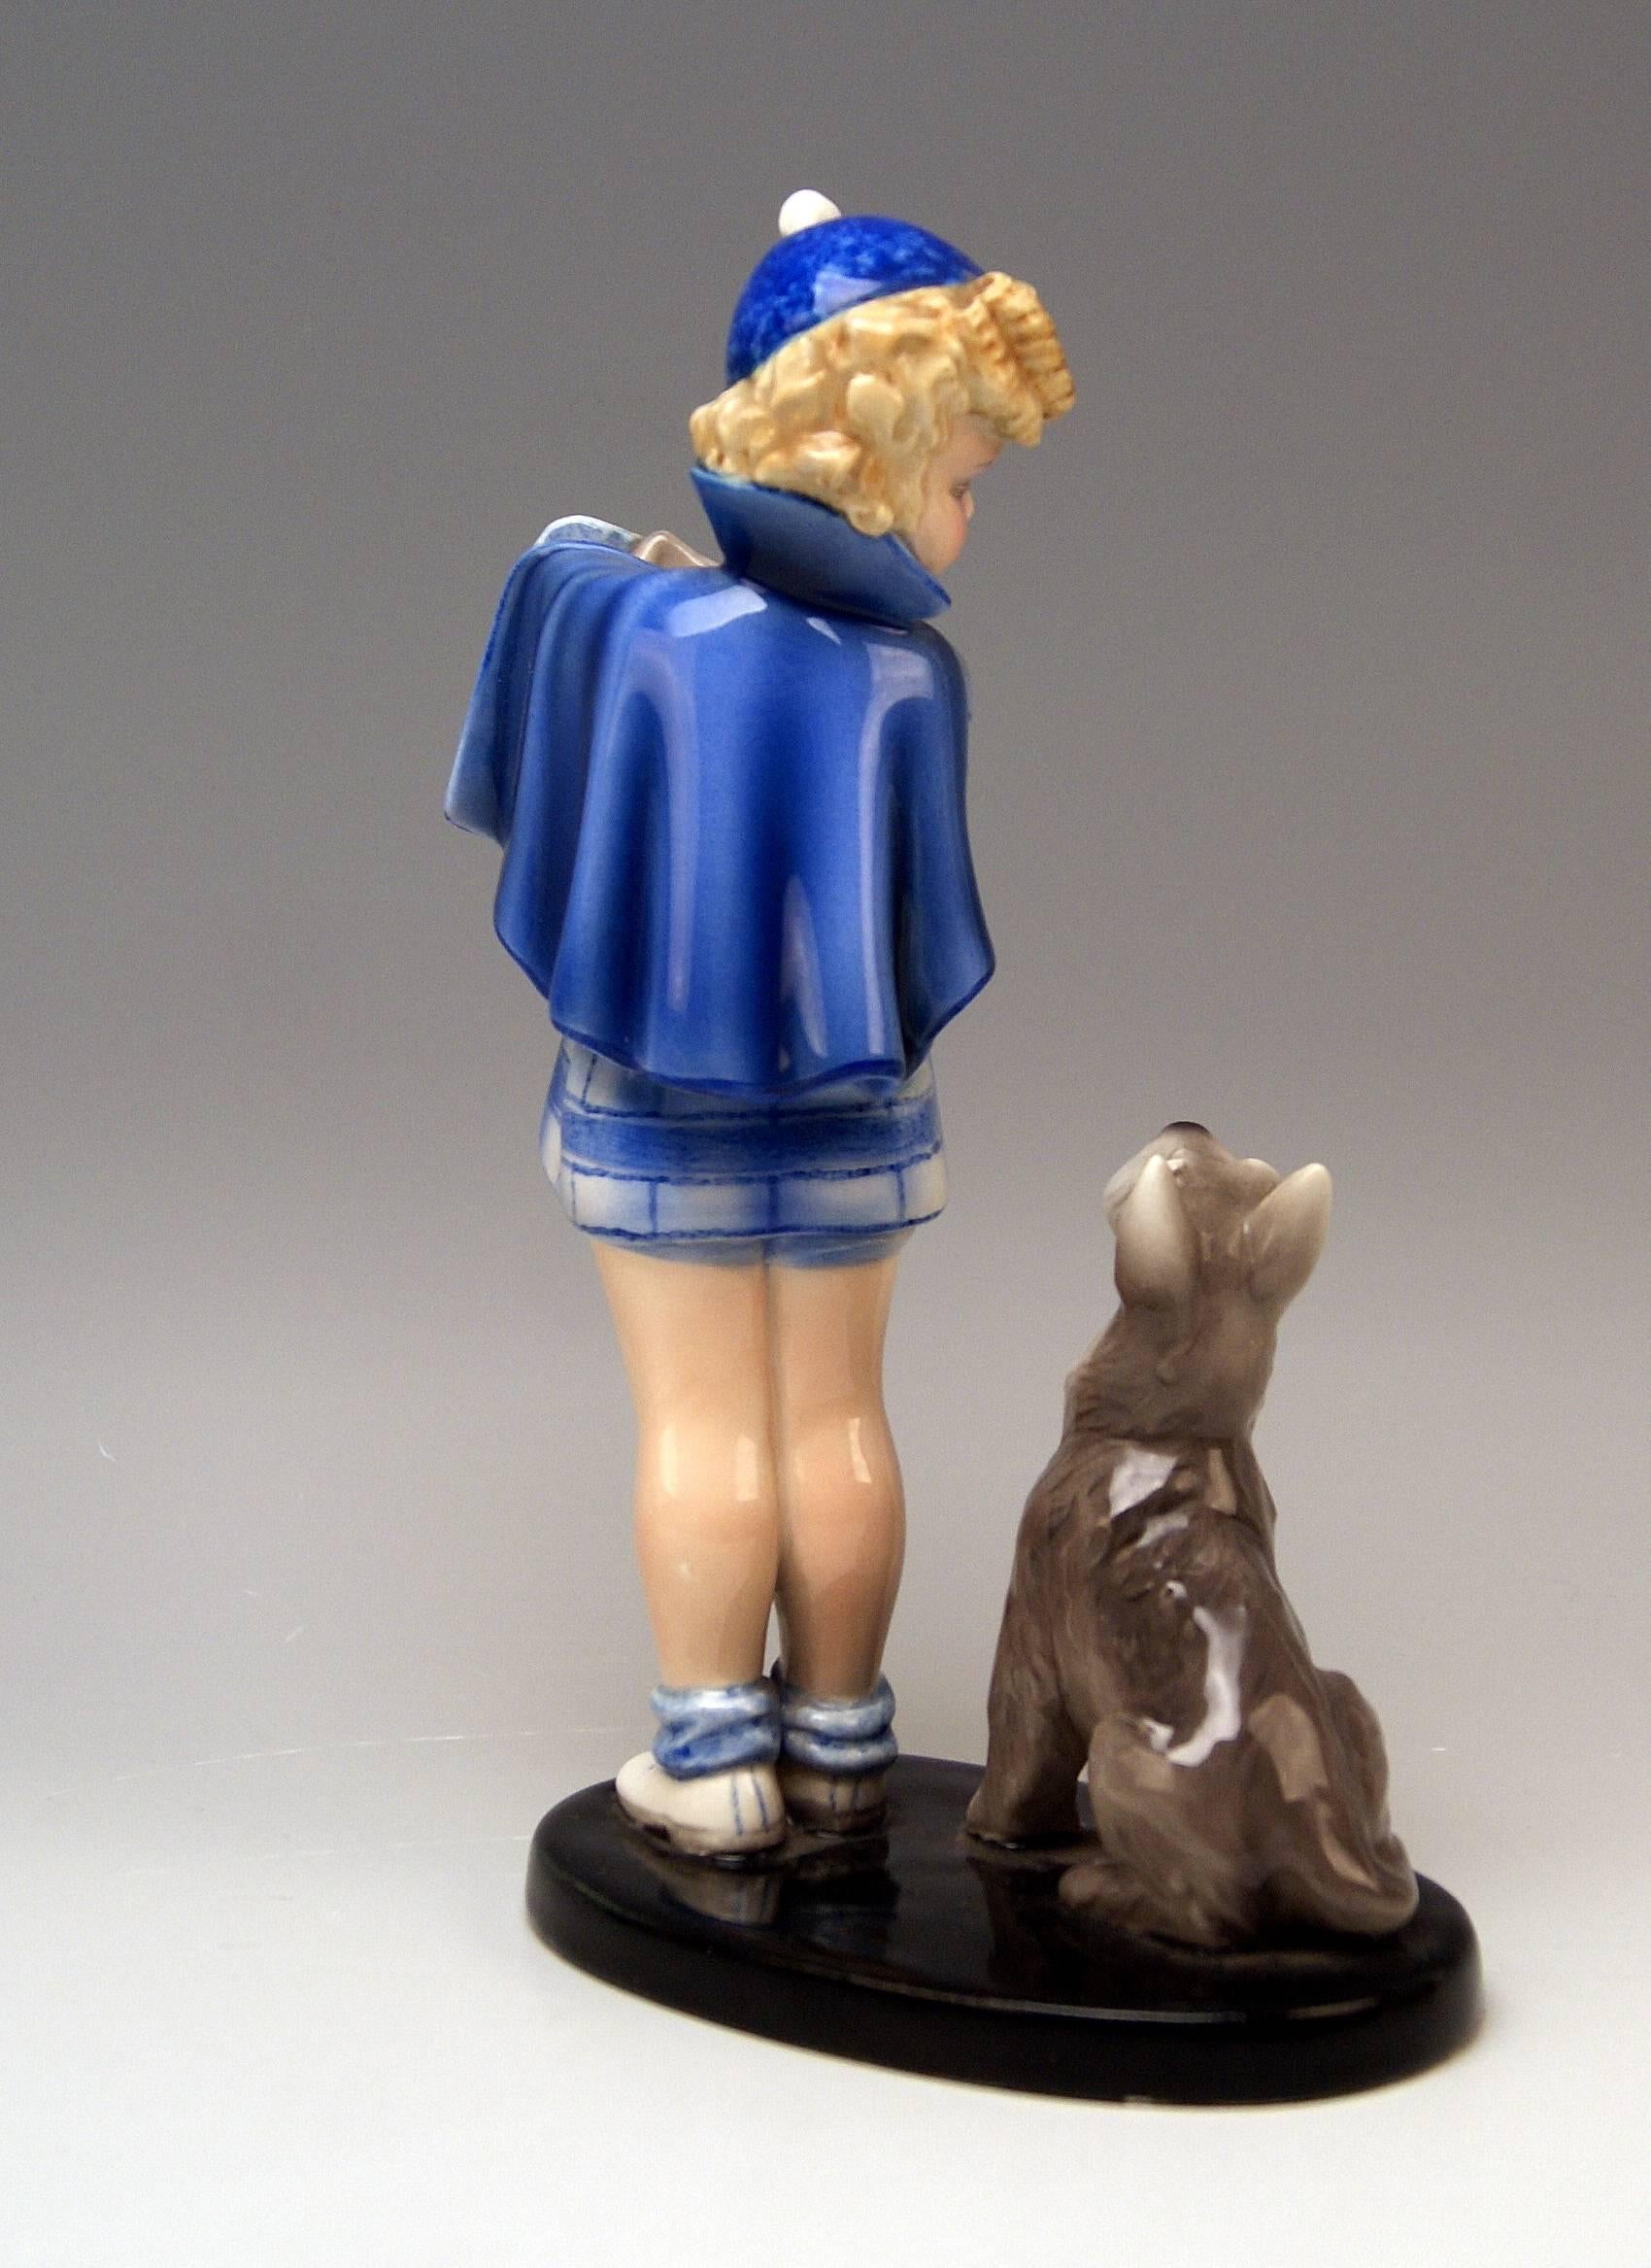 Goldscheider Vienna stunning girl figurine:
Girl figurine accompanied by Scottish Terrier - This Figurine Group is Called: Come With Me!

This model was once created by Germaine BOURET (1907- 1953).
Bouret was a French illustrator, having become